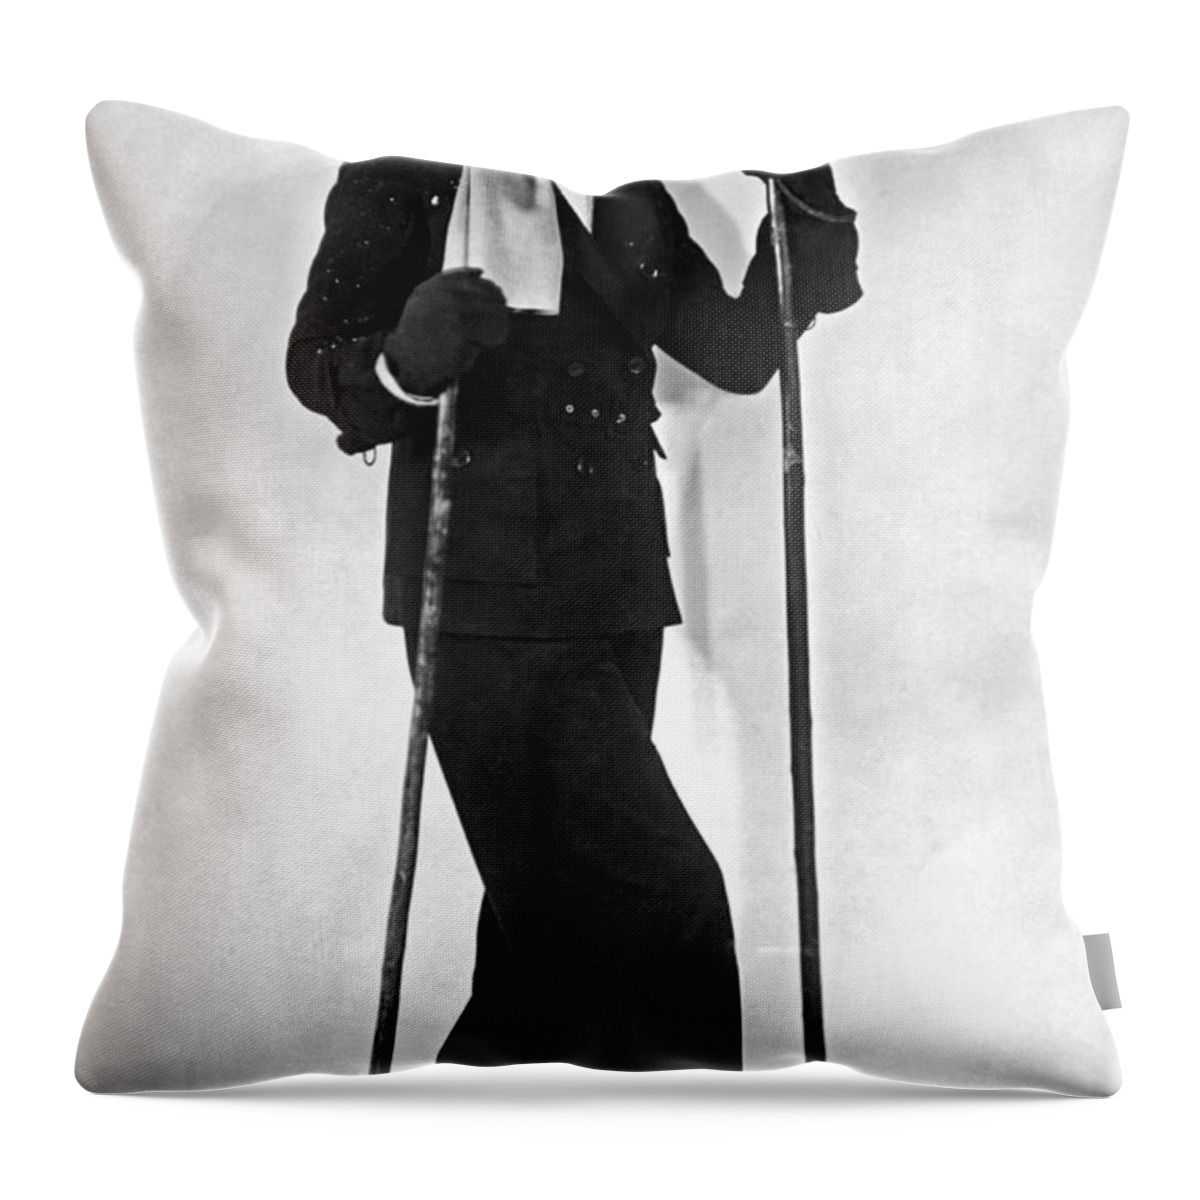 1930 Throw Pillow featuring the photograph The Latest Paris Ski Ensemble by Underwood Archives